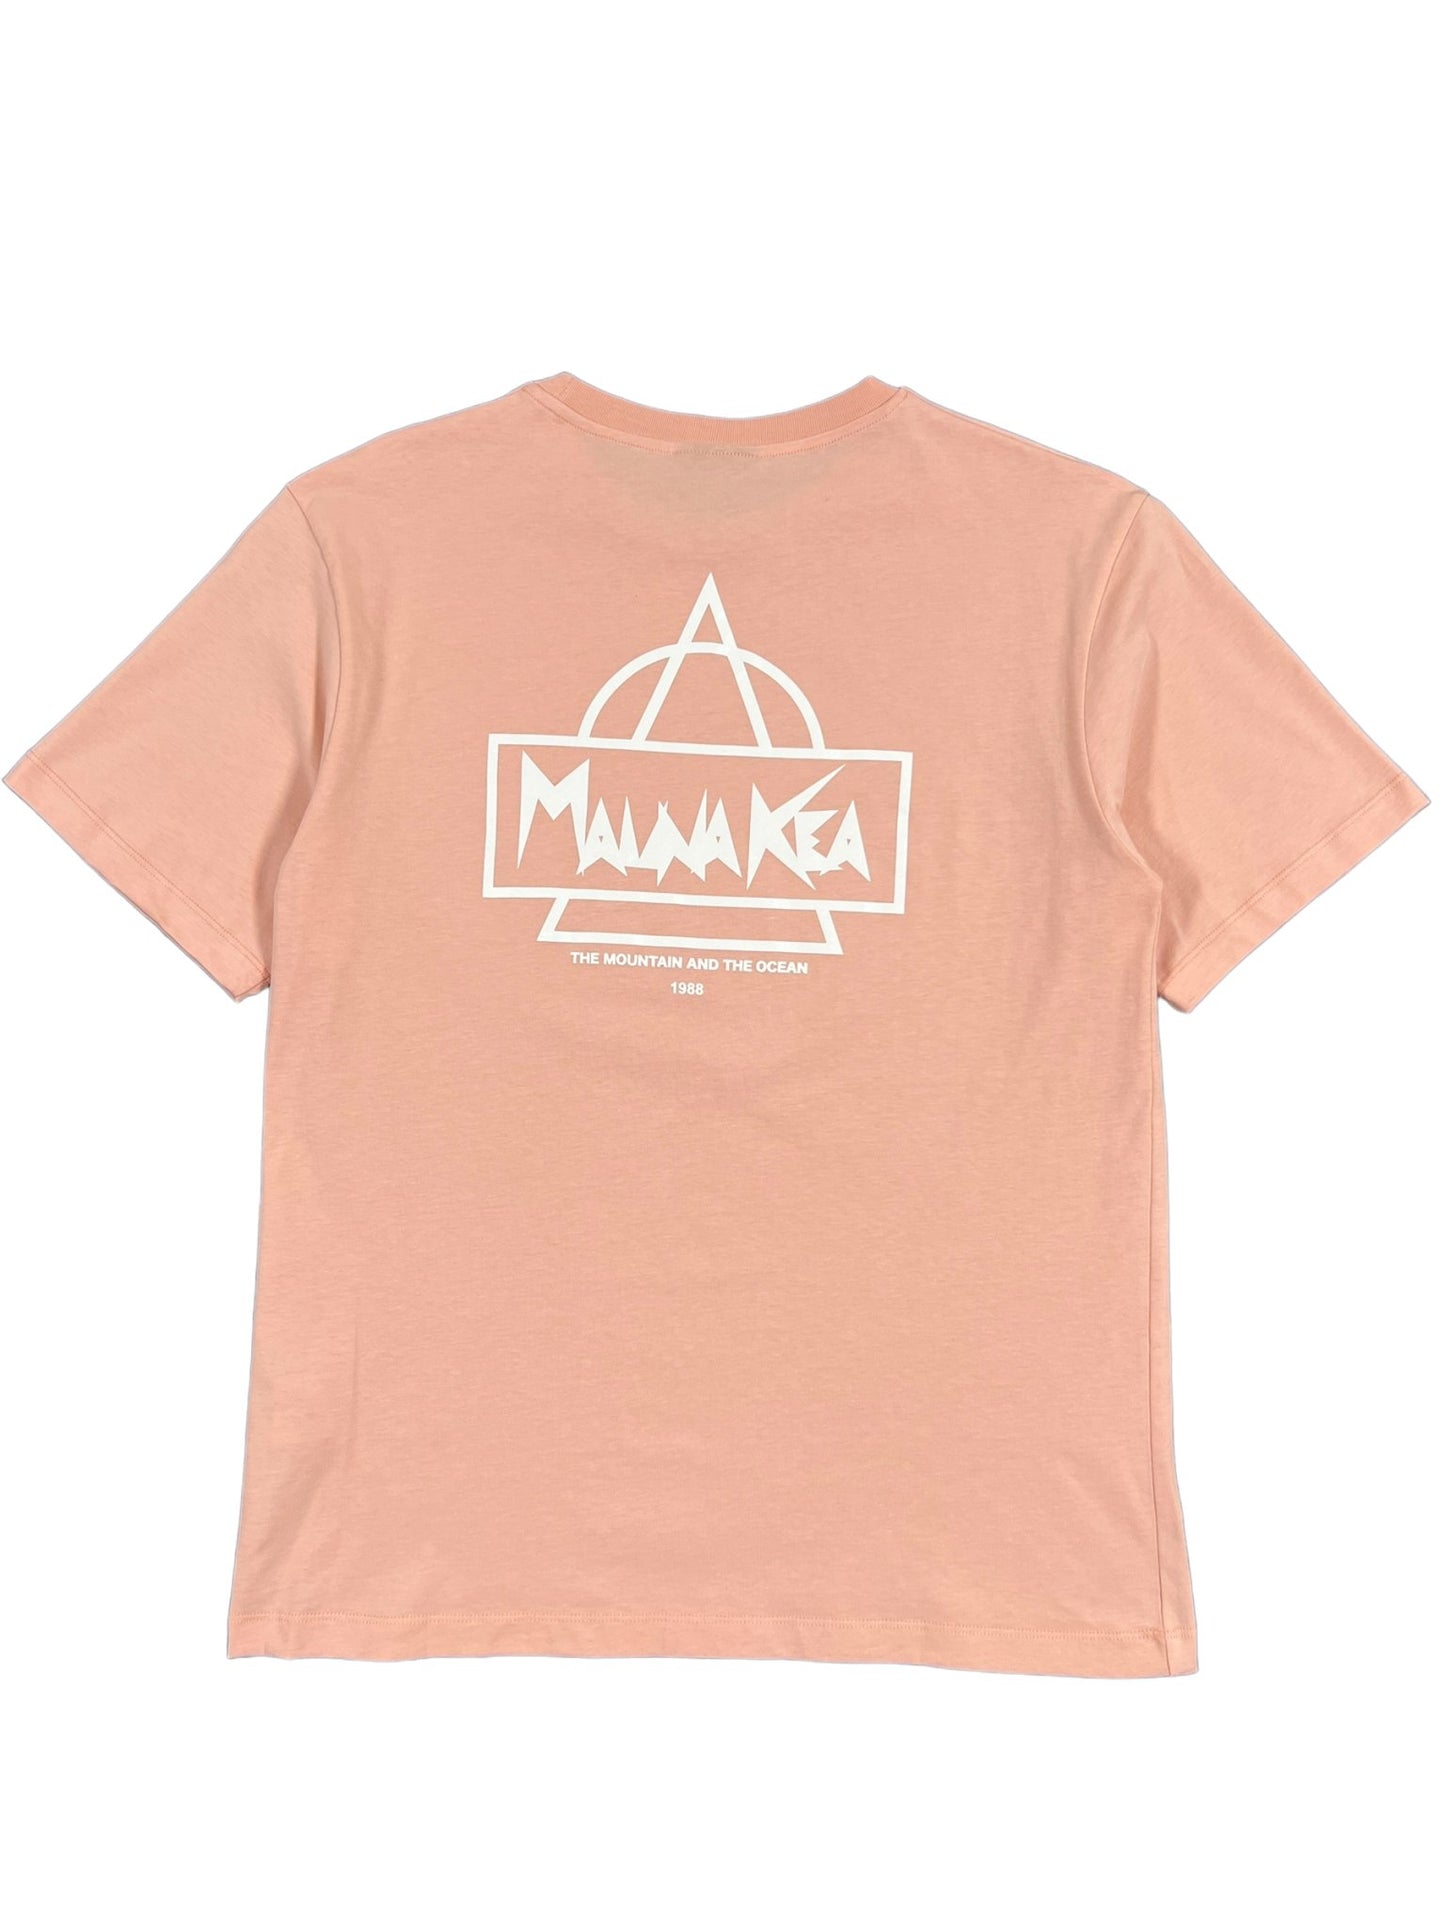 A pink, 100% cotton T-shirt features a white graphic on the back displaying the words "Mauna Kea" along with a triangle and semi-circle symbol. Below, it says "The Mountain and the Ocean 1963". This MAUNA-KEA MAUNA-KEA MKE100-04 HERITAGE TEE W SCREEN PRINT PINK blends comfort with style.